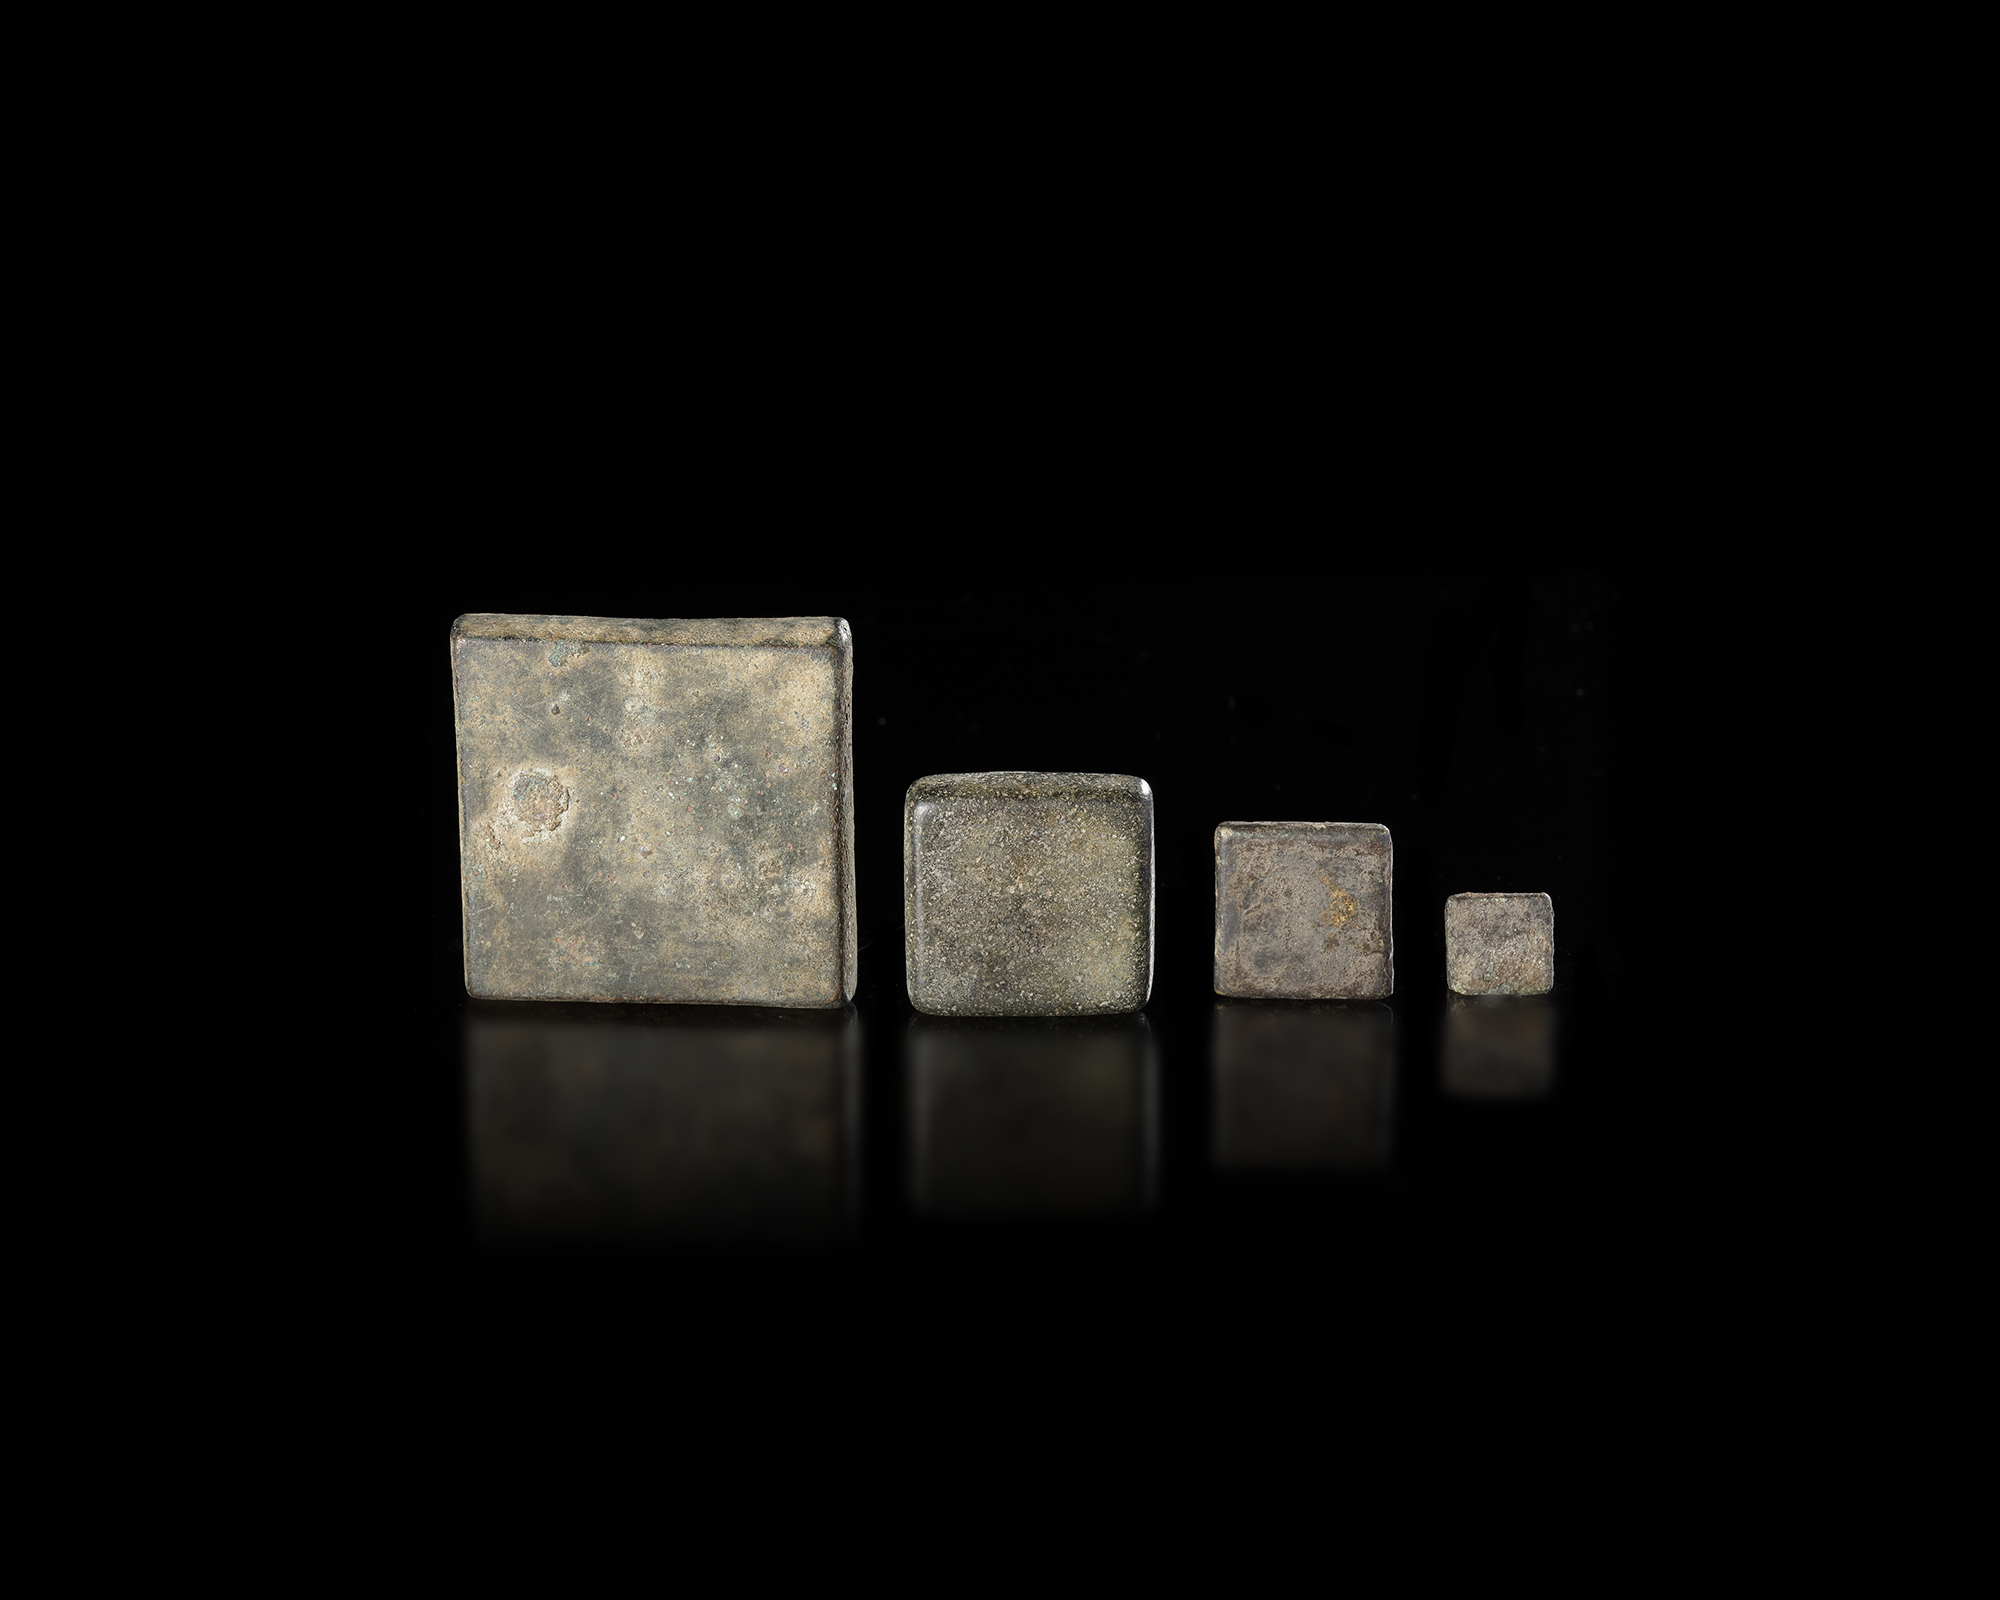 FOUR BYZANTINE COMMERCIAL WEIGHTS WITH SILVER INLAY, 5TH-7TH CENTURY AD - Bild 3 aus 4